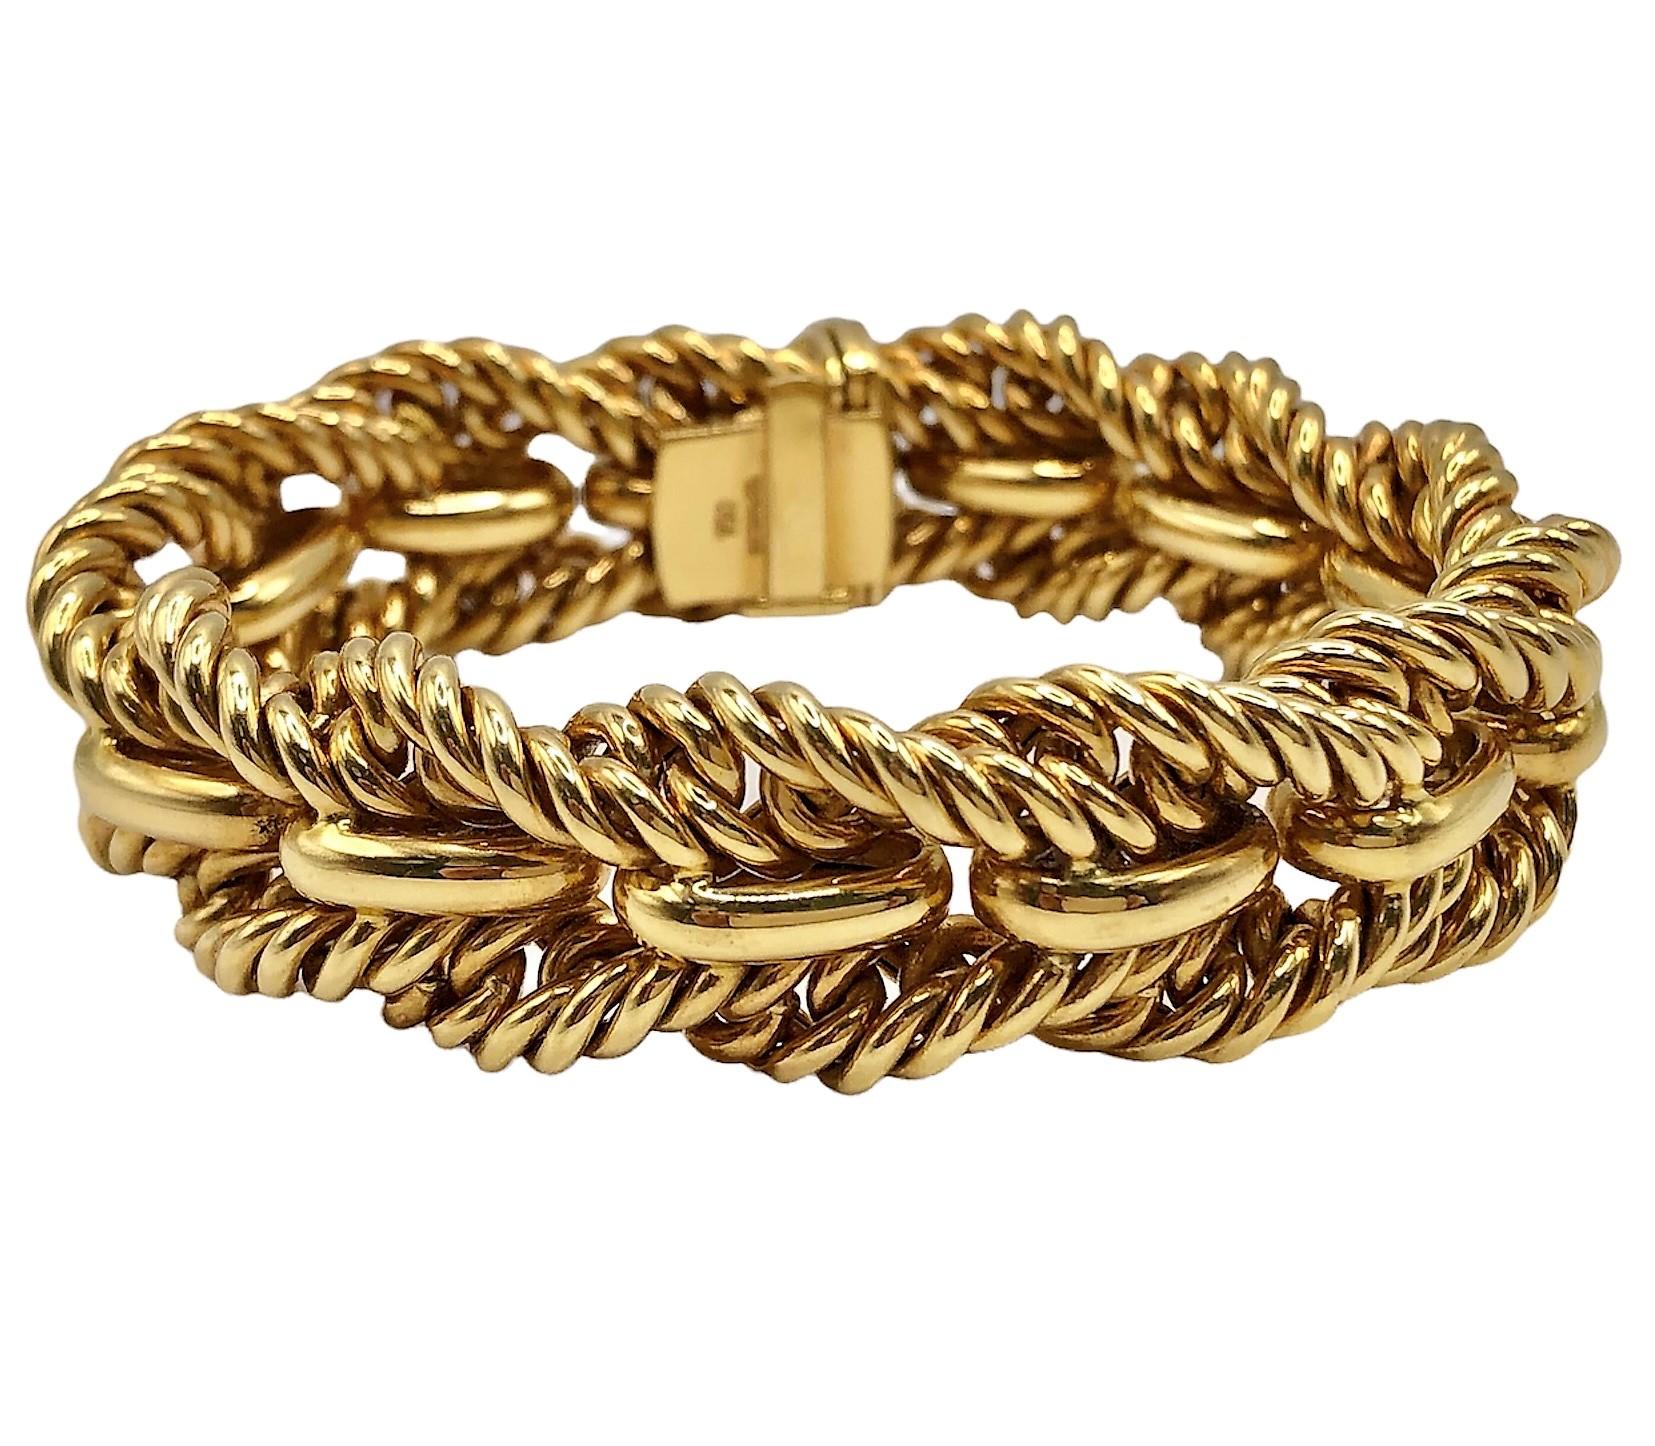 This elegant 18k yellow gold Tiffany & Co. bracelet is designed with two rope edges bracketing a center line of repeating high polish bombe motifs.  Measures 7 3/8 inches in length by 5/8 inches in width. The inline plunger clasp is made more secure